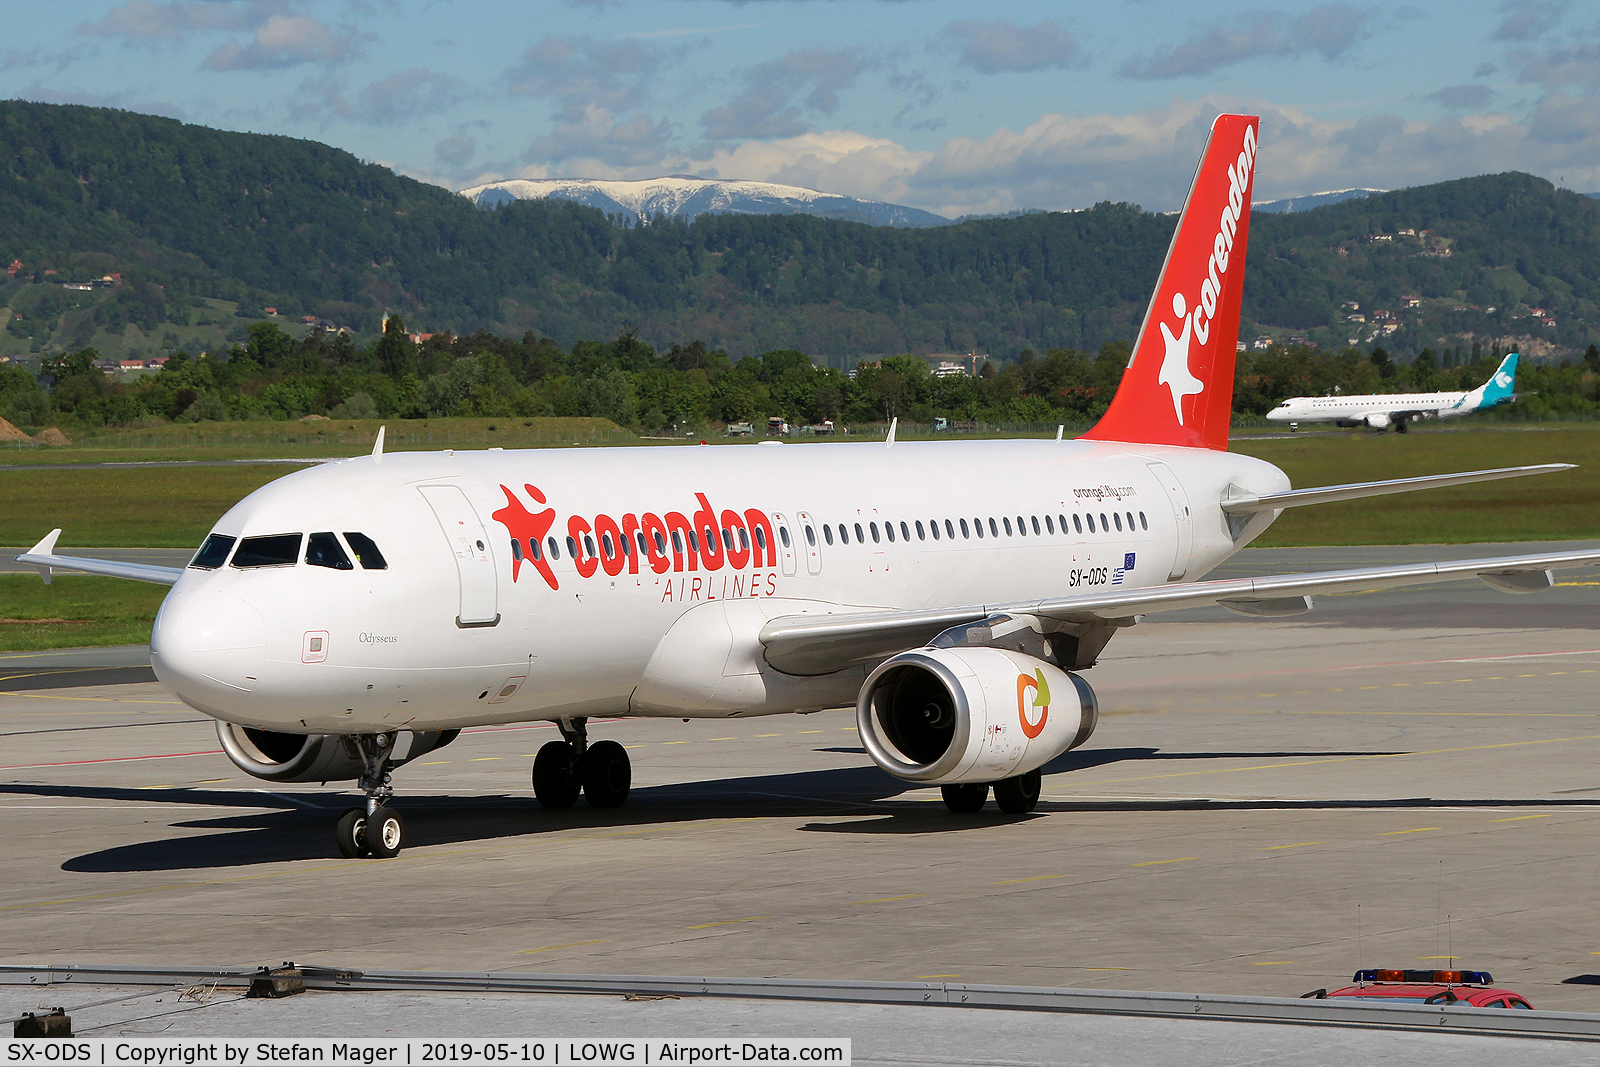 SX-ODS, 2006 Airbus A320-232 C/N 2724, Corendon Airlines A320-200 @GRZ
(saisonal charter to RHO)